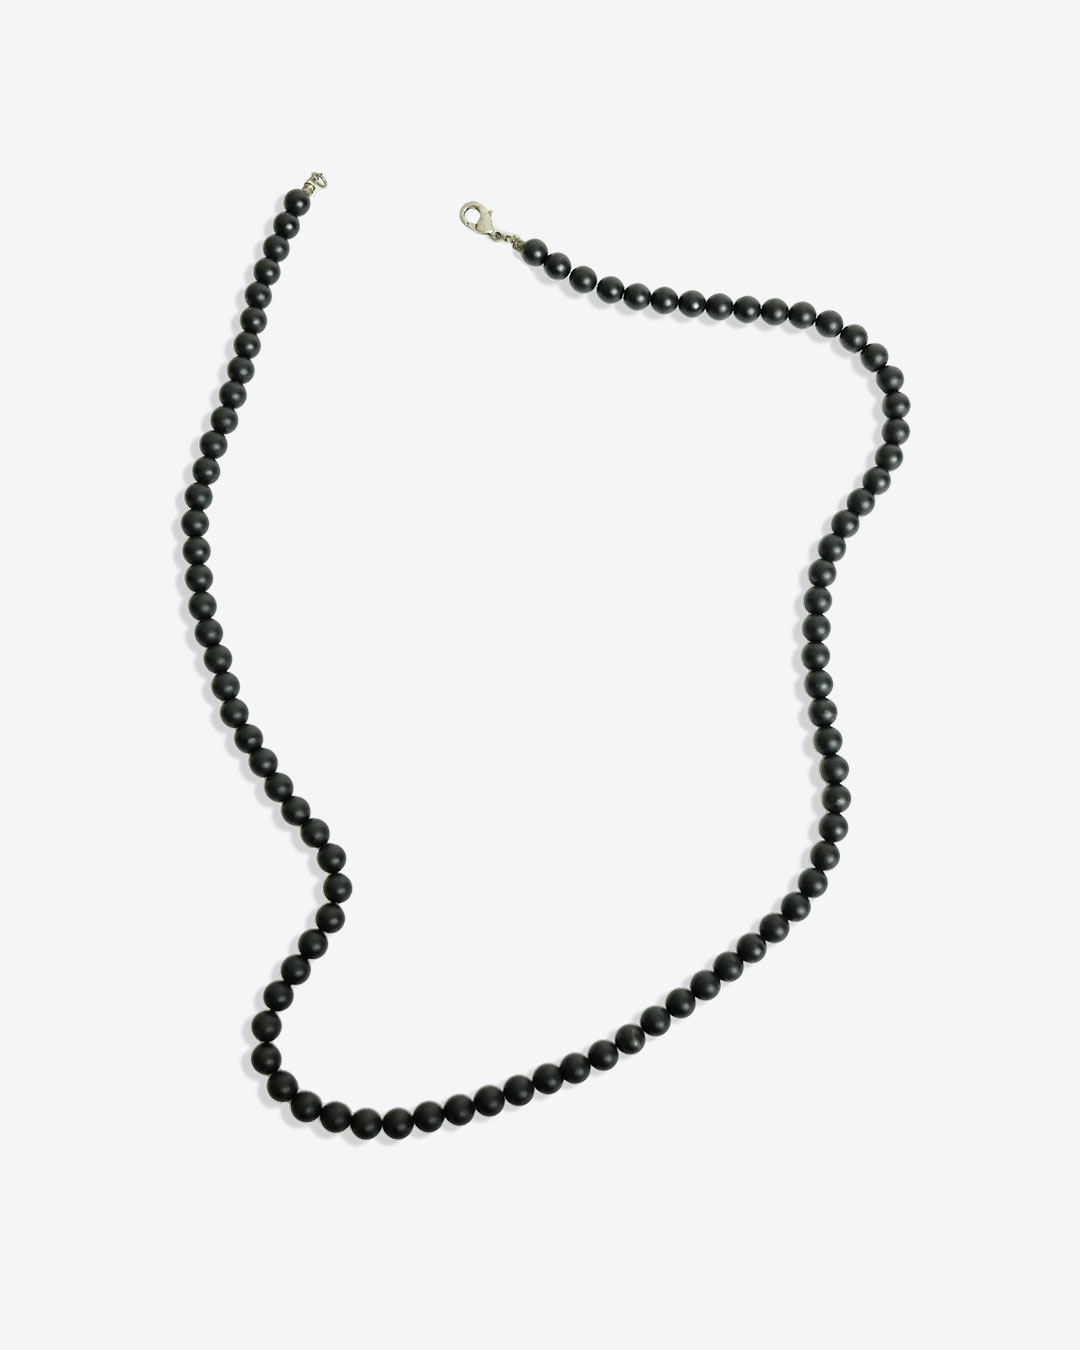 Necklace in Black Beads - URBANE MUSE CHRIS SMITH®